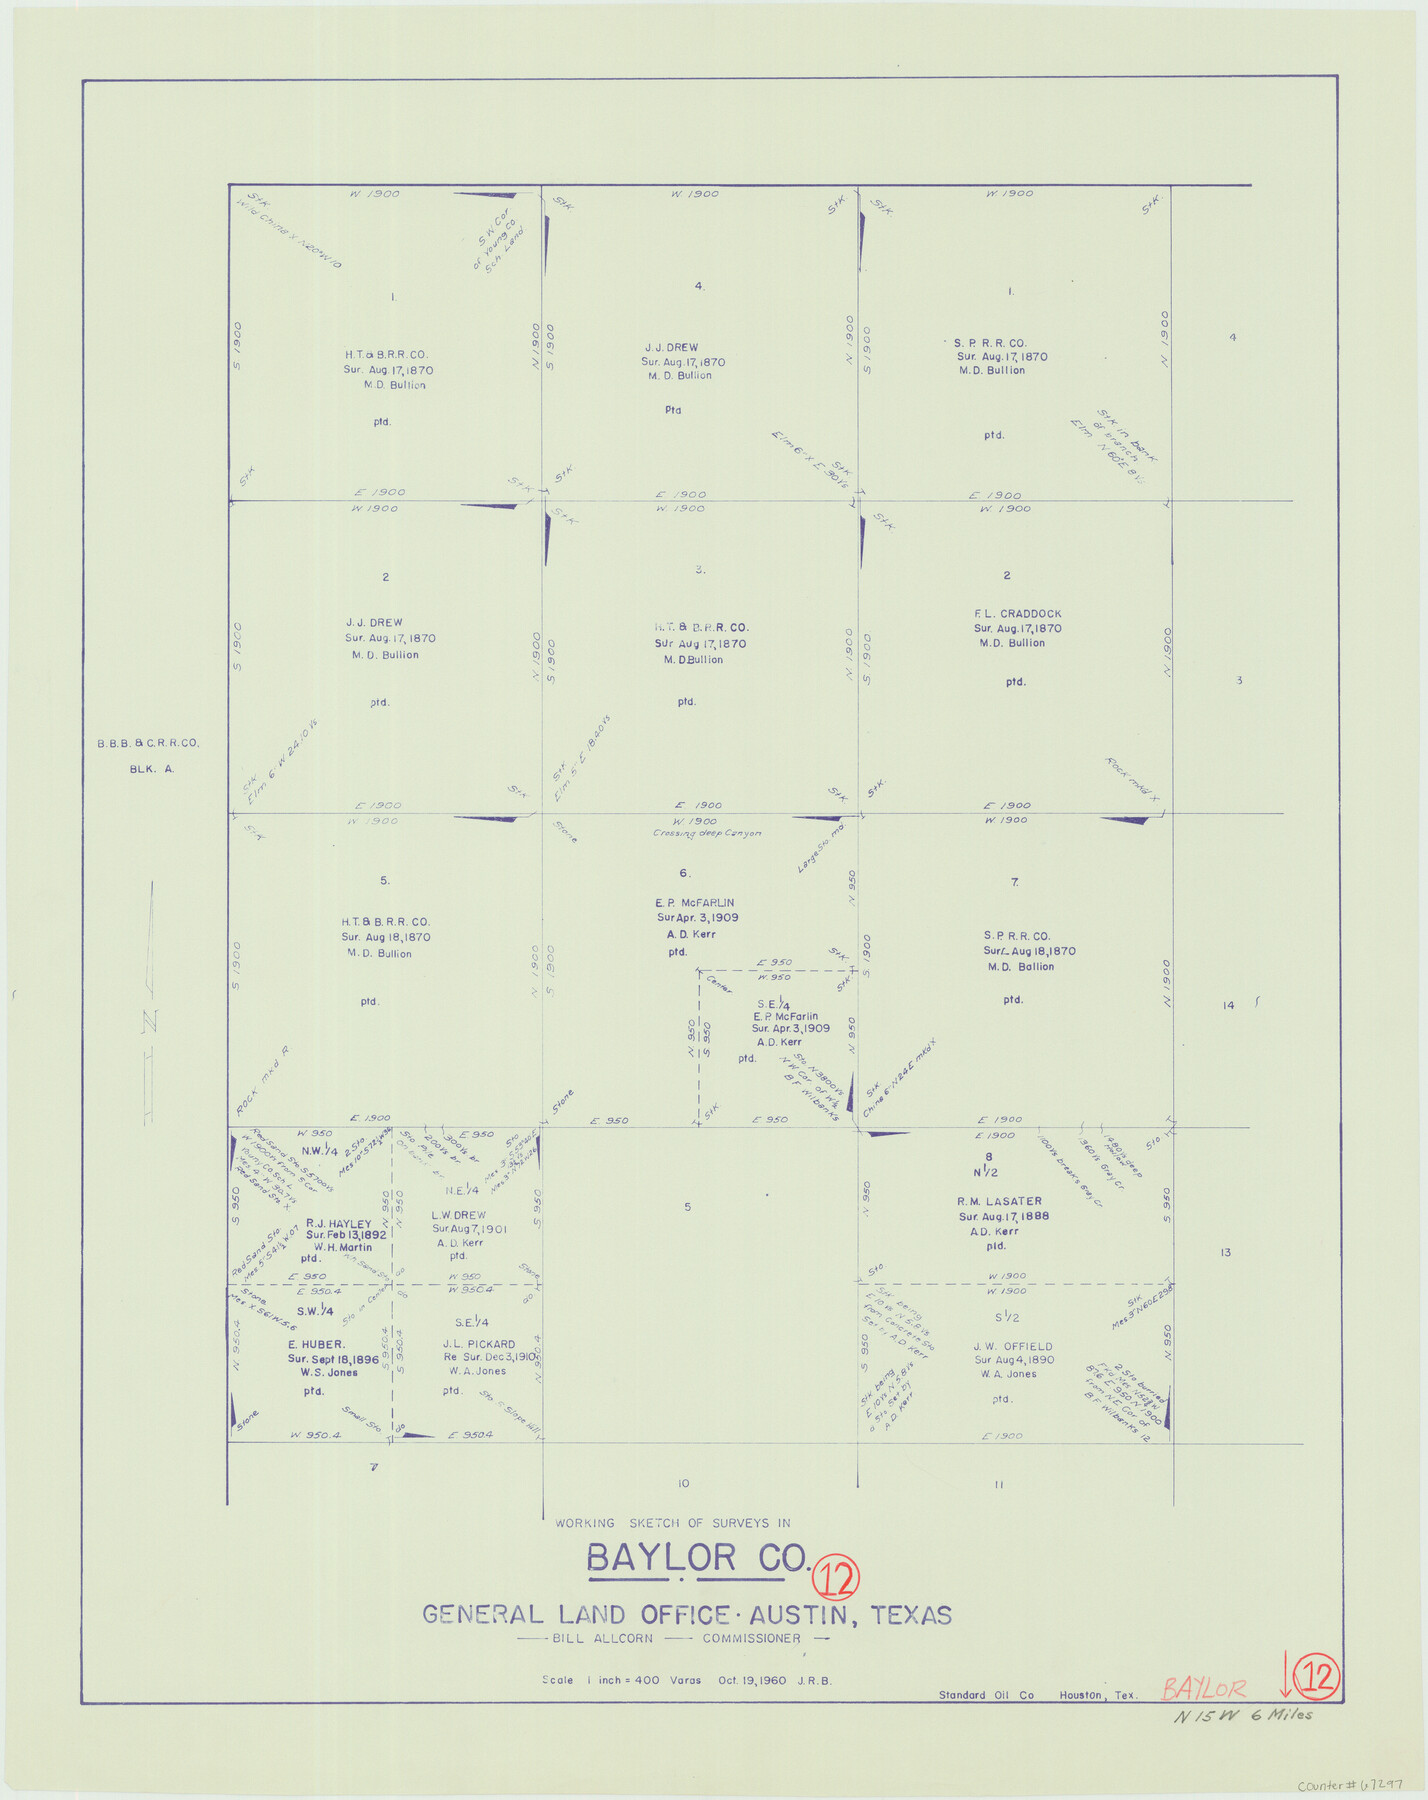 67297, Baylor County Working Sketch 12, General Map Collection